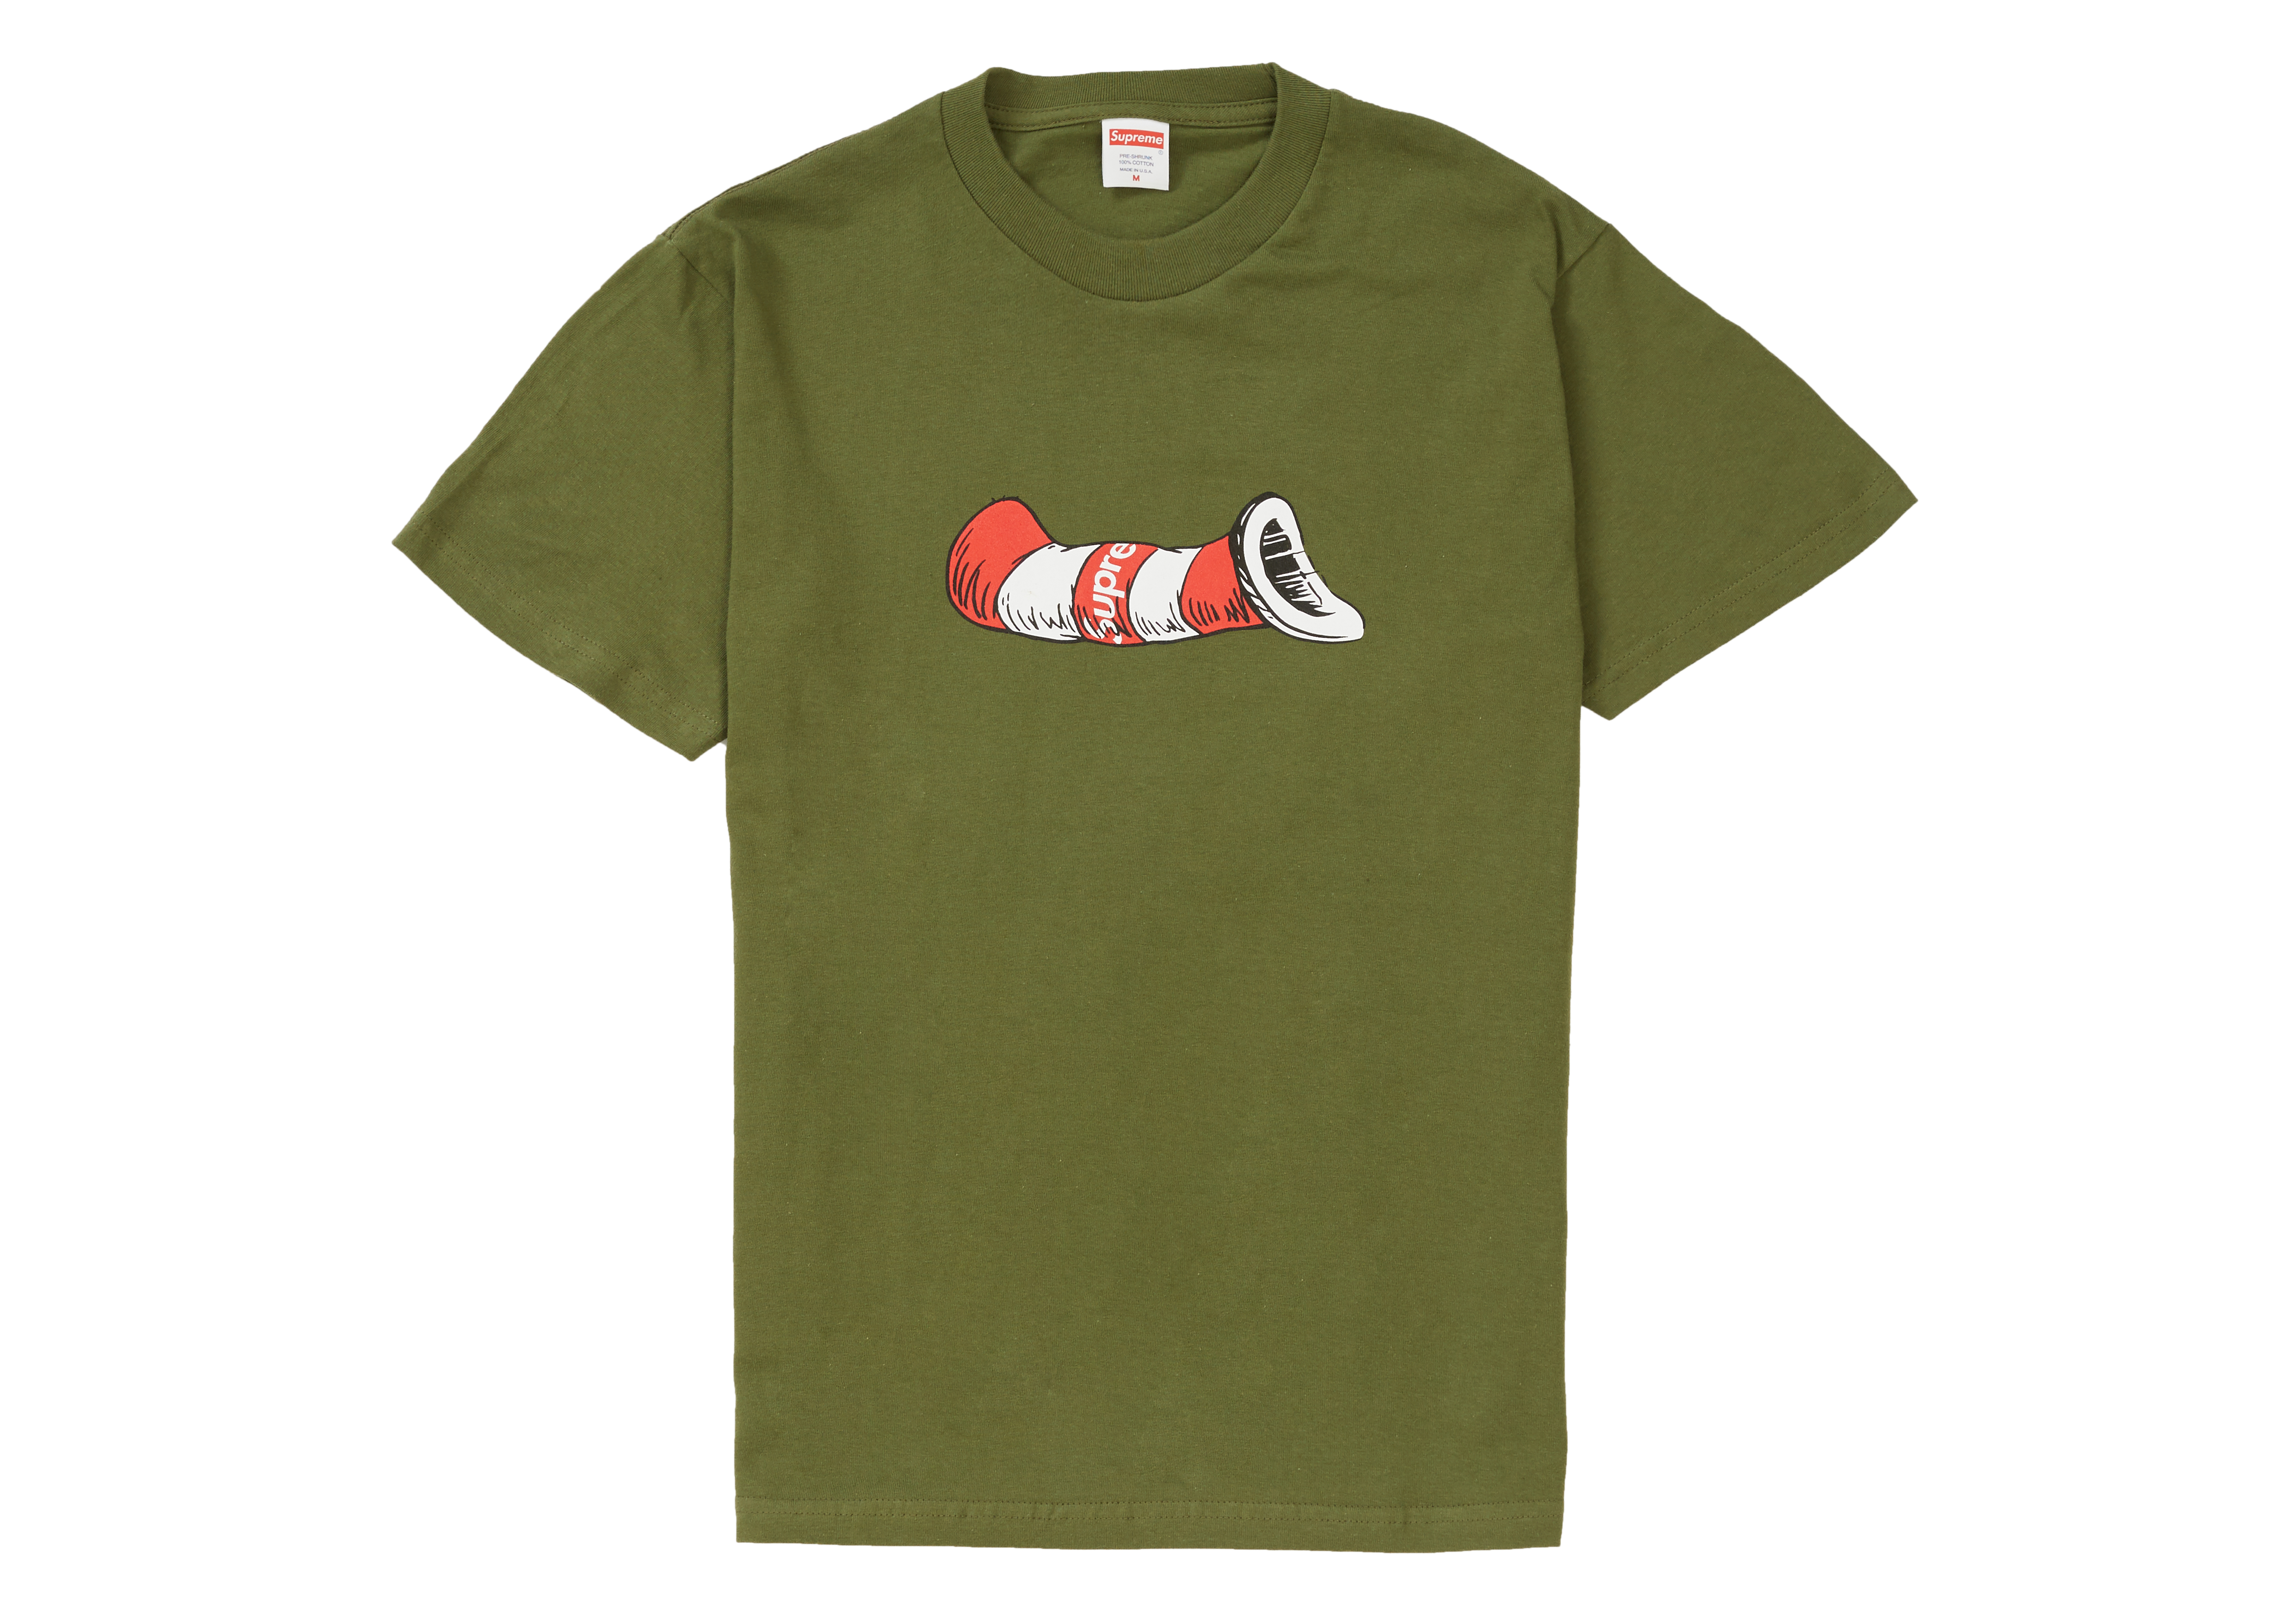 Supreme - Cat in the Hat Tee